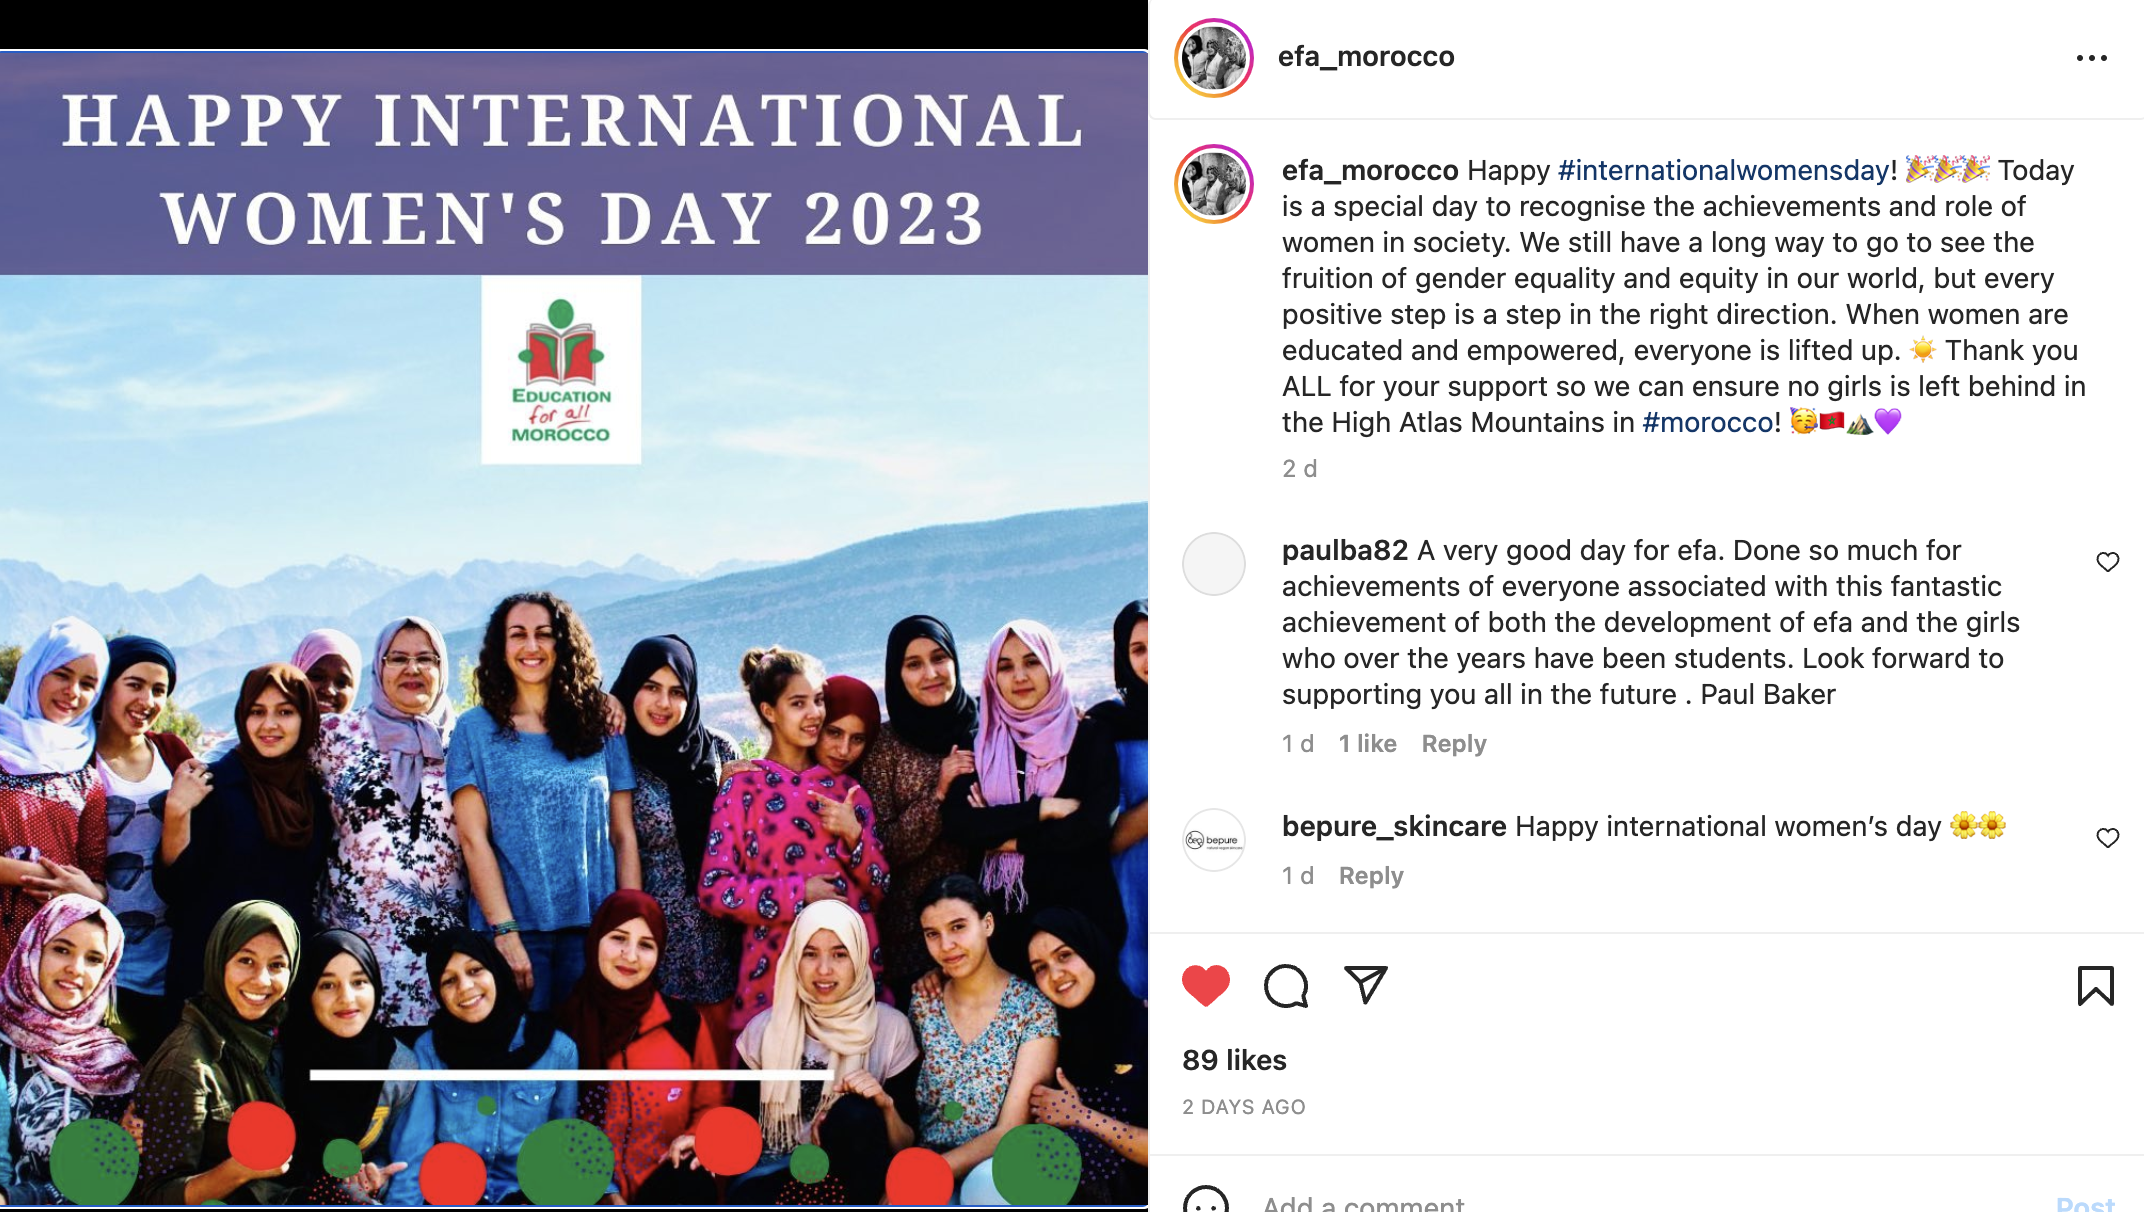 Lightful participant, Education for All Morocco, celebrated International Women's Day by posting this uplifting photo and message to their social media channels.